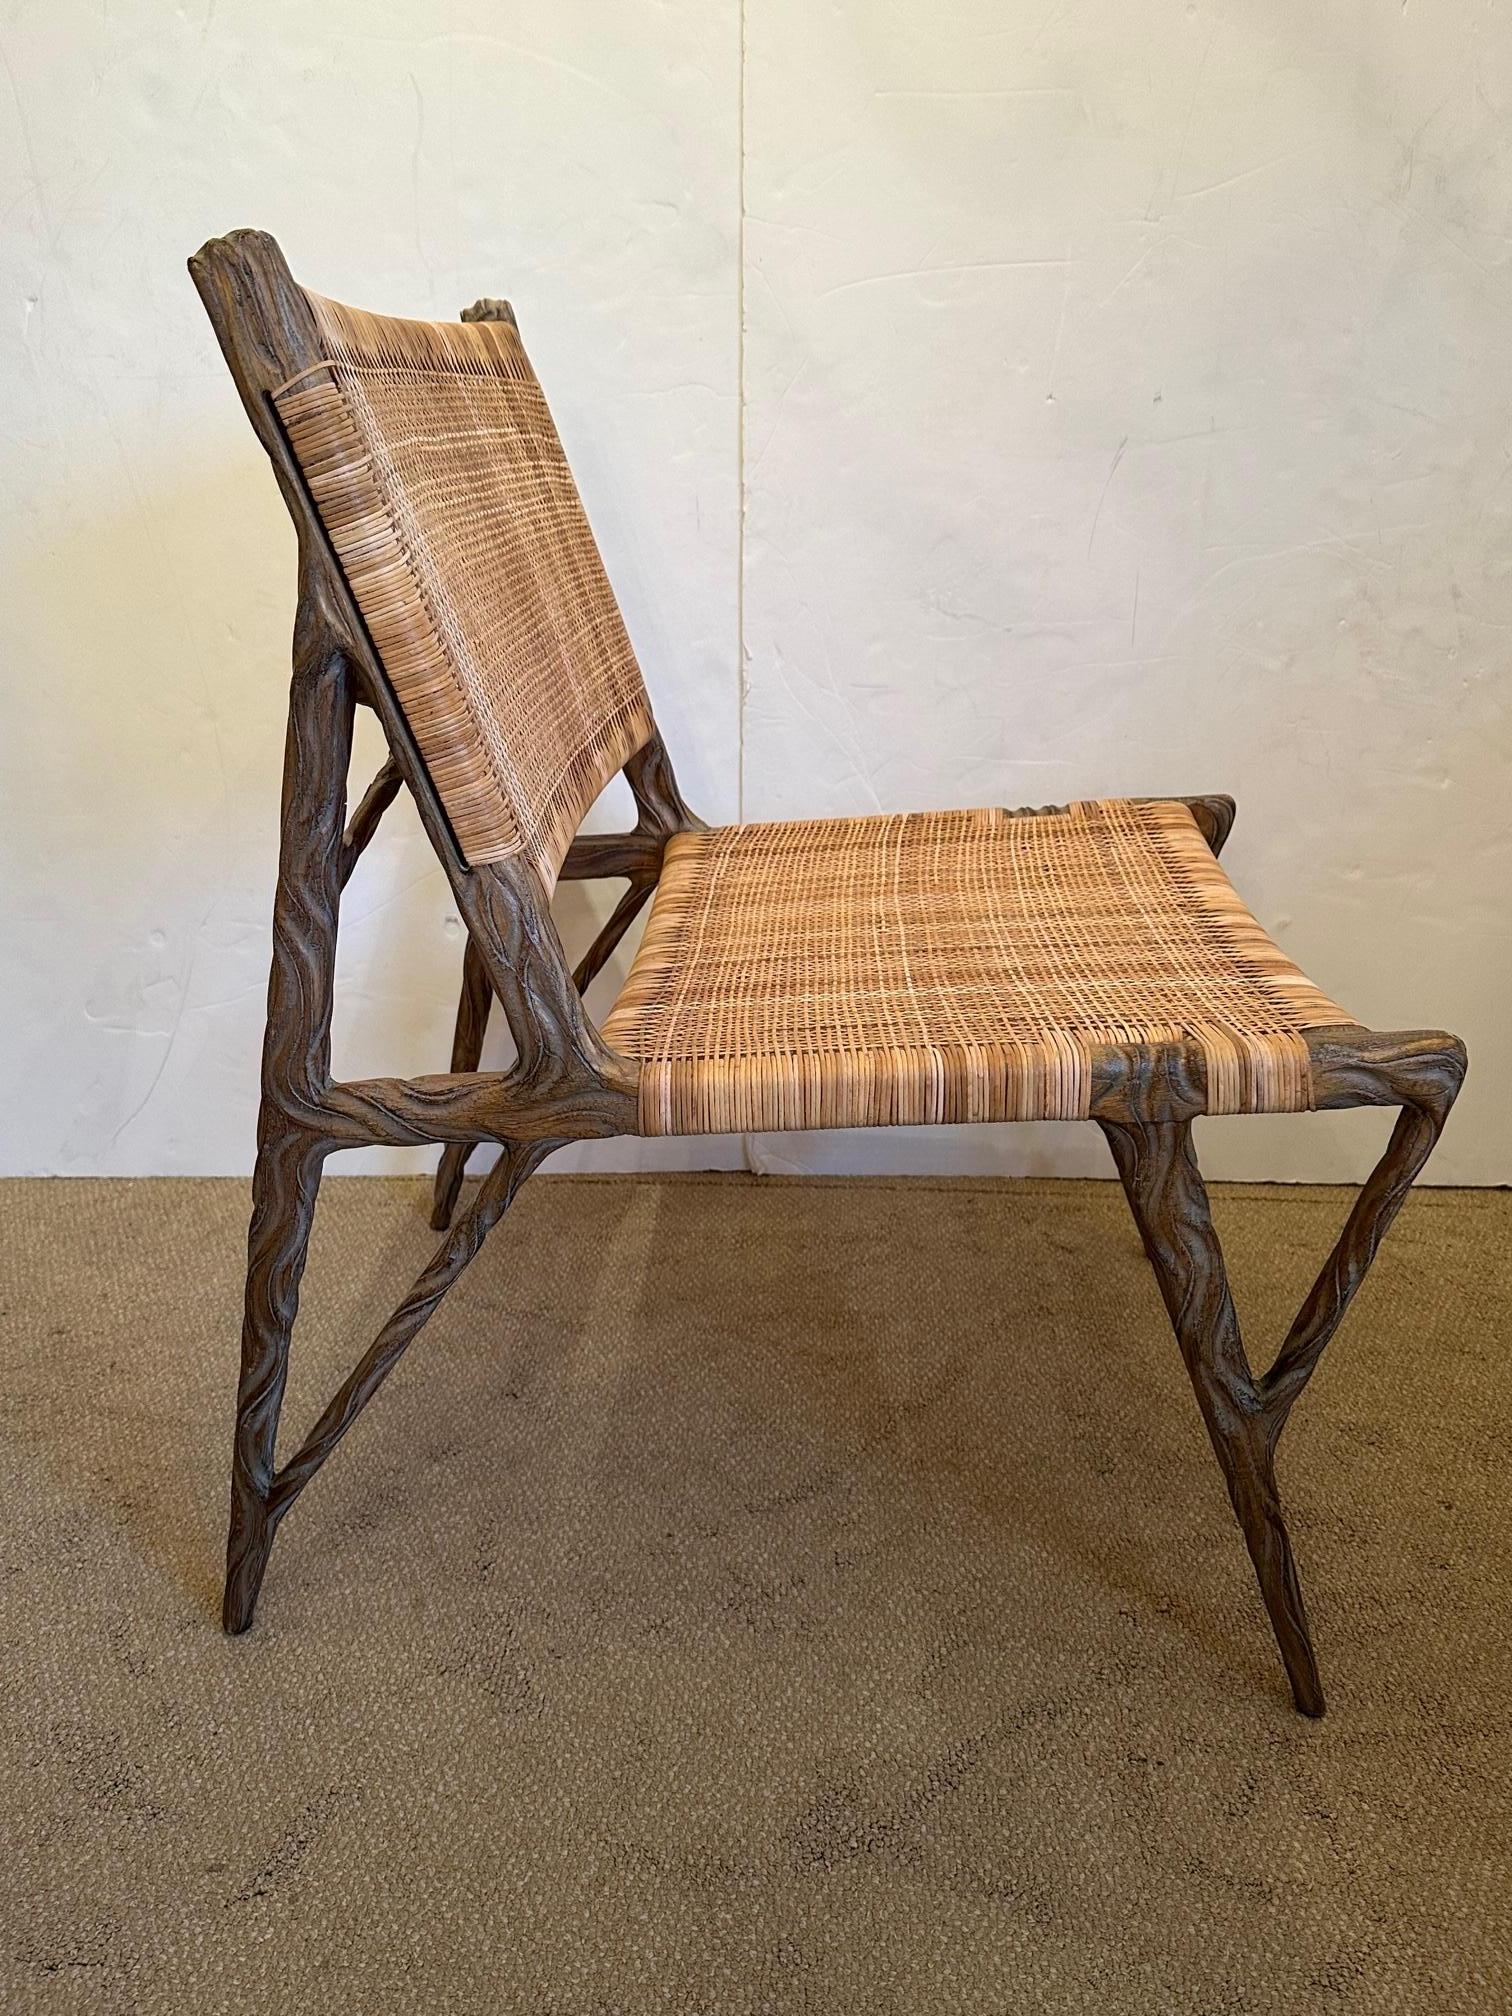 Superb organic modern occasional chair having sculptural faux bois twig like structure and shapely legs with woven natural colored rattan seat and back. This is the favorite chair in a room for it's forward design and natural feel.
Measures: Seat